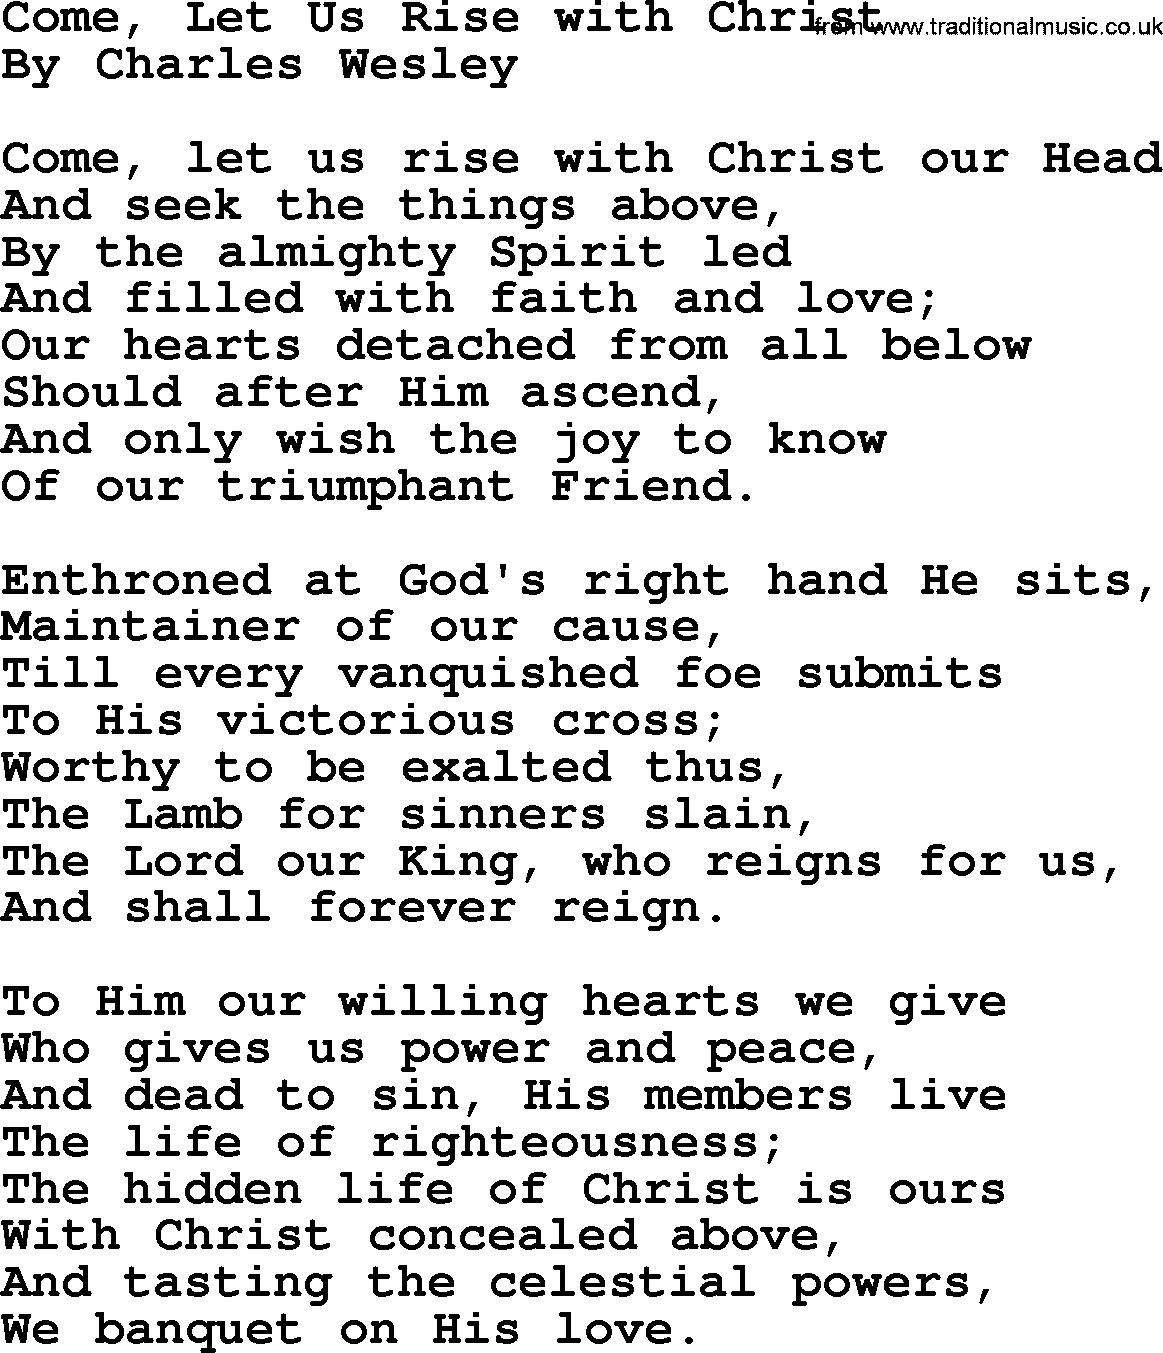 Charles Wesley hymn: Come, Let Us Rise with Christ, lyrics